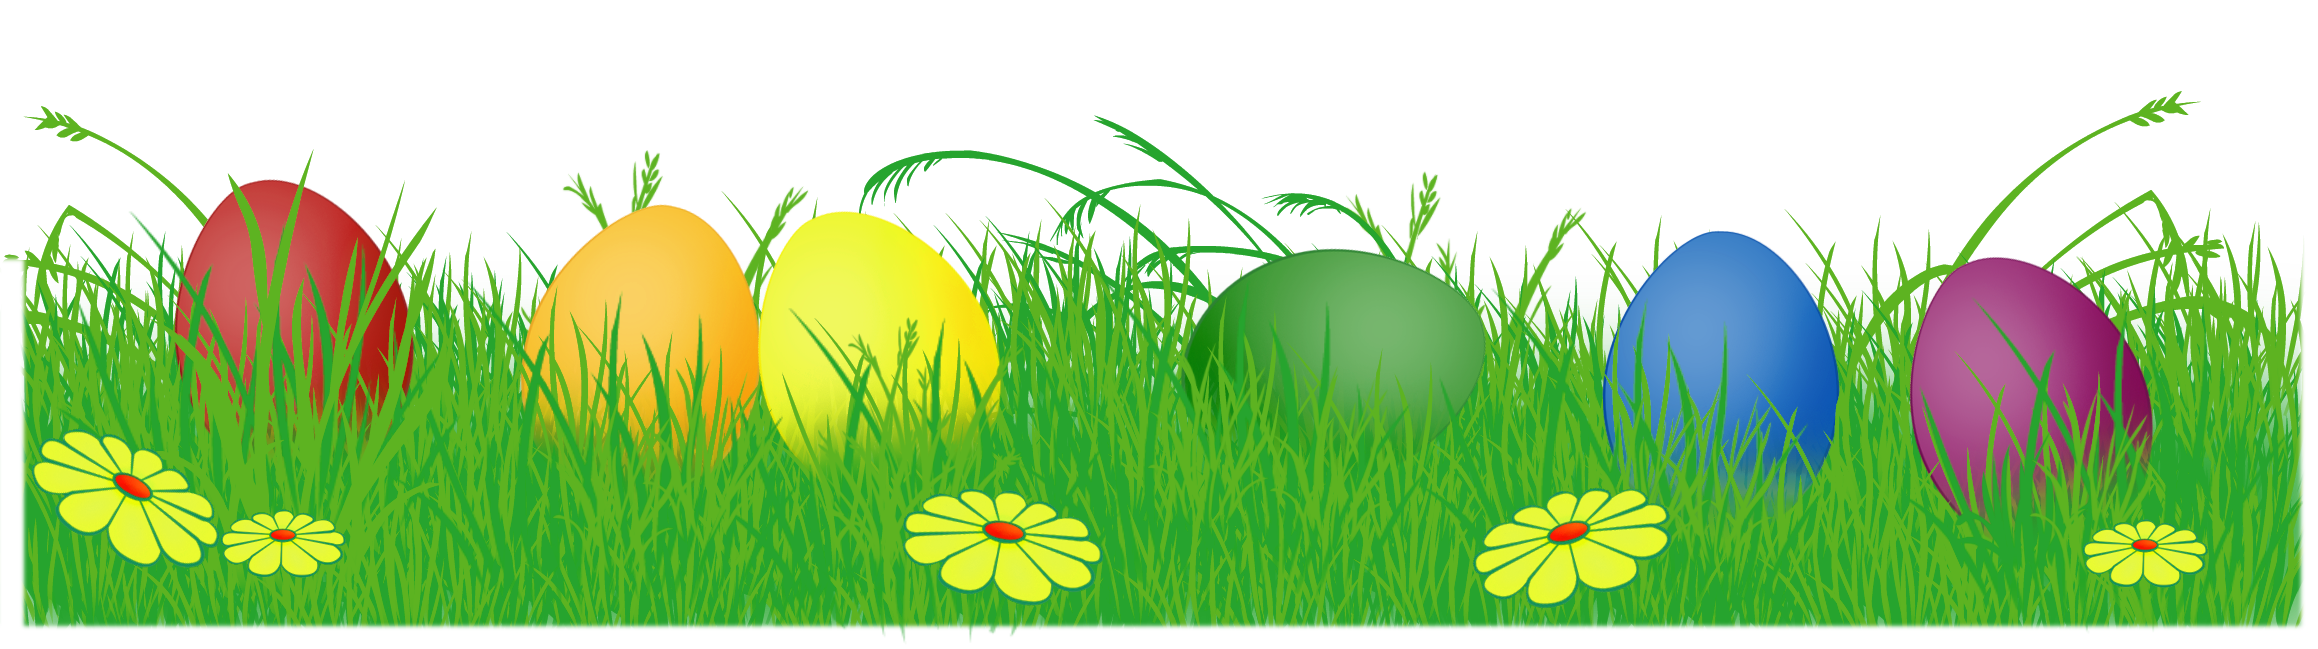 Easter Eggs In Grass PNG Image